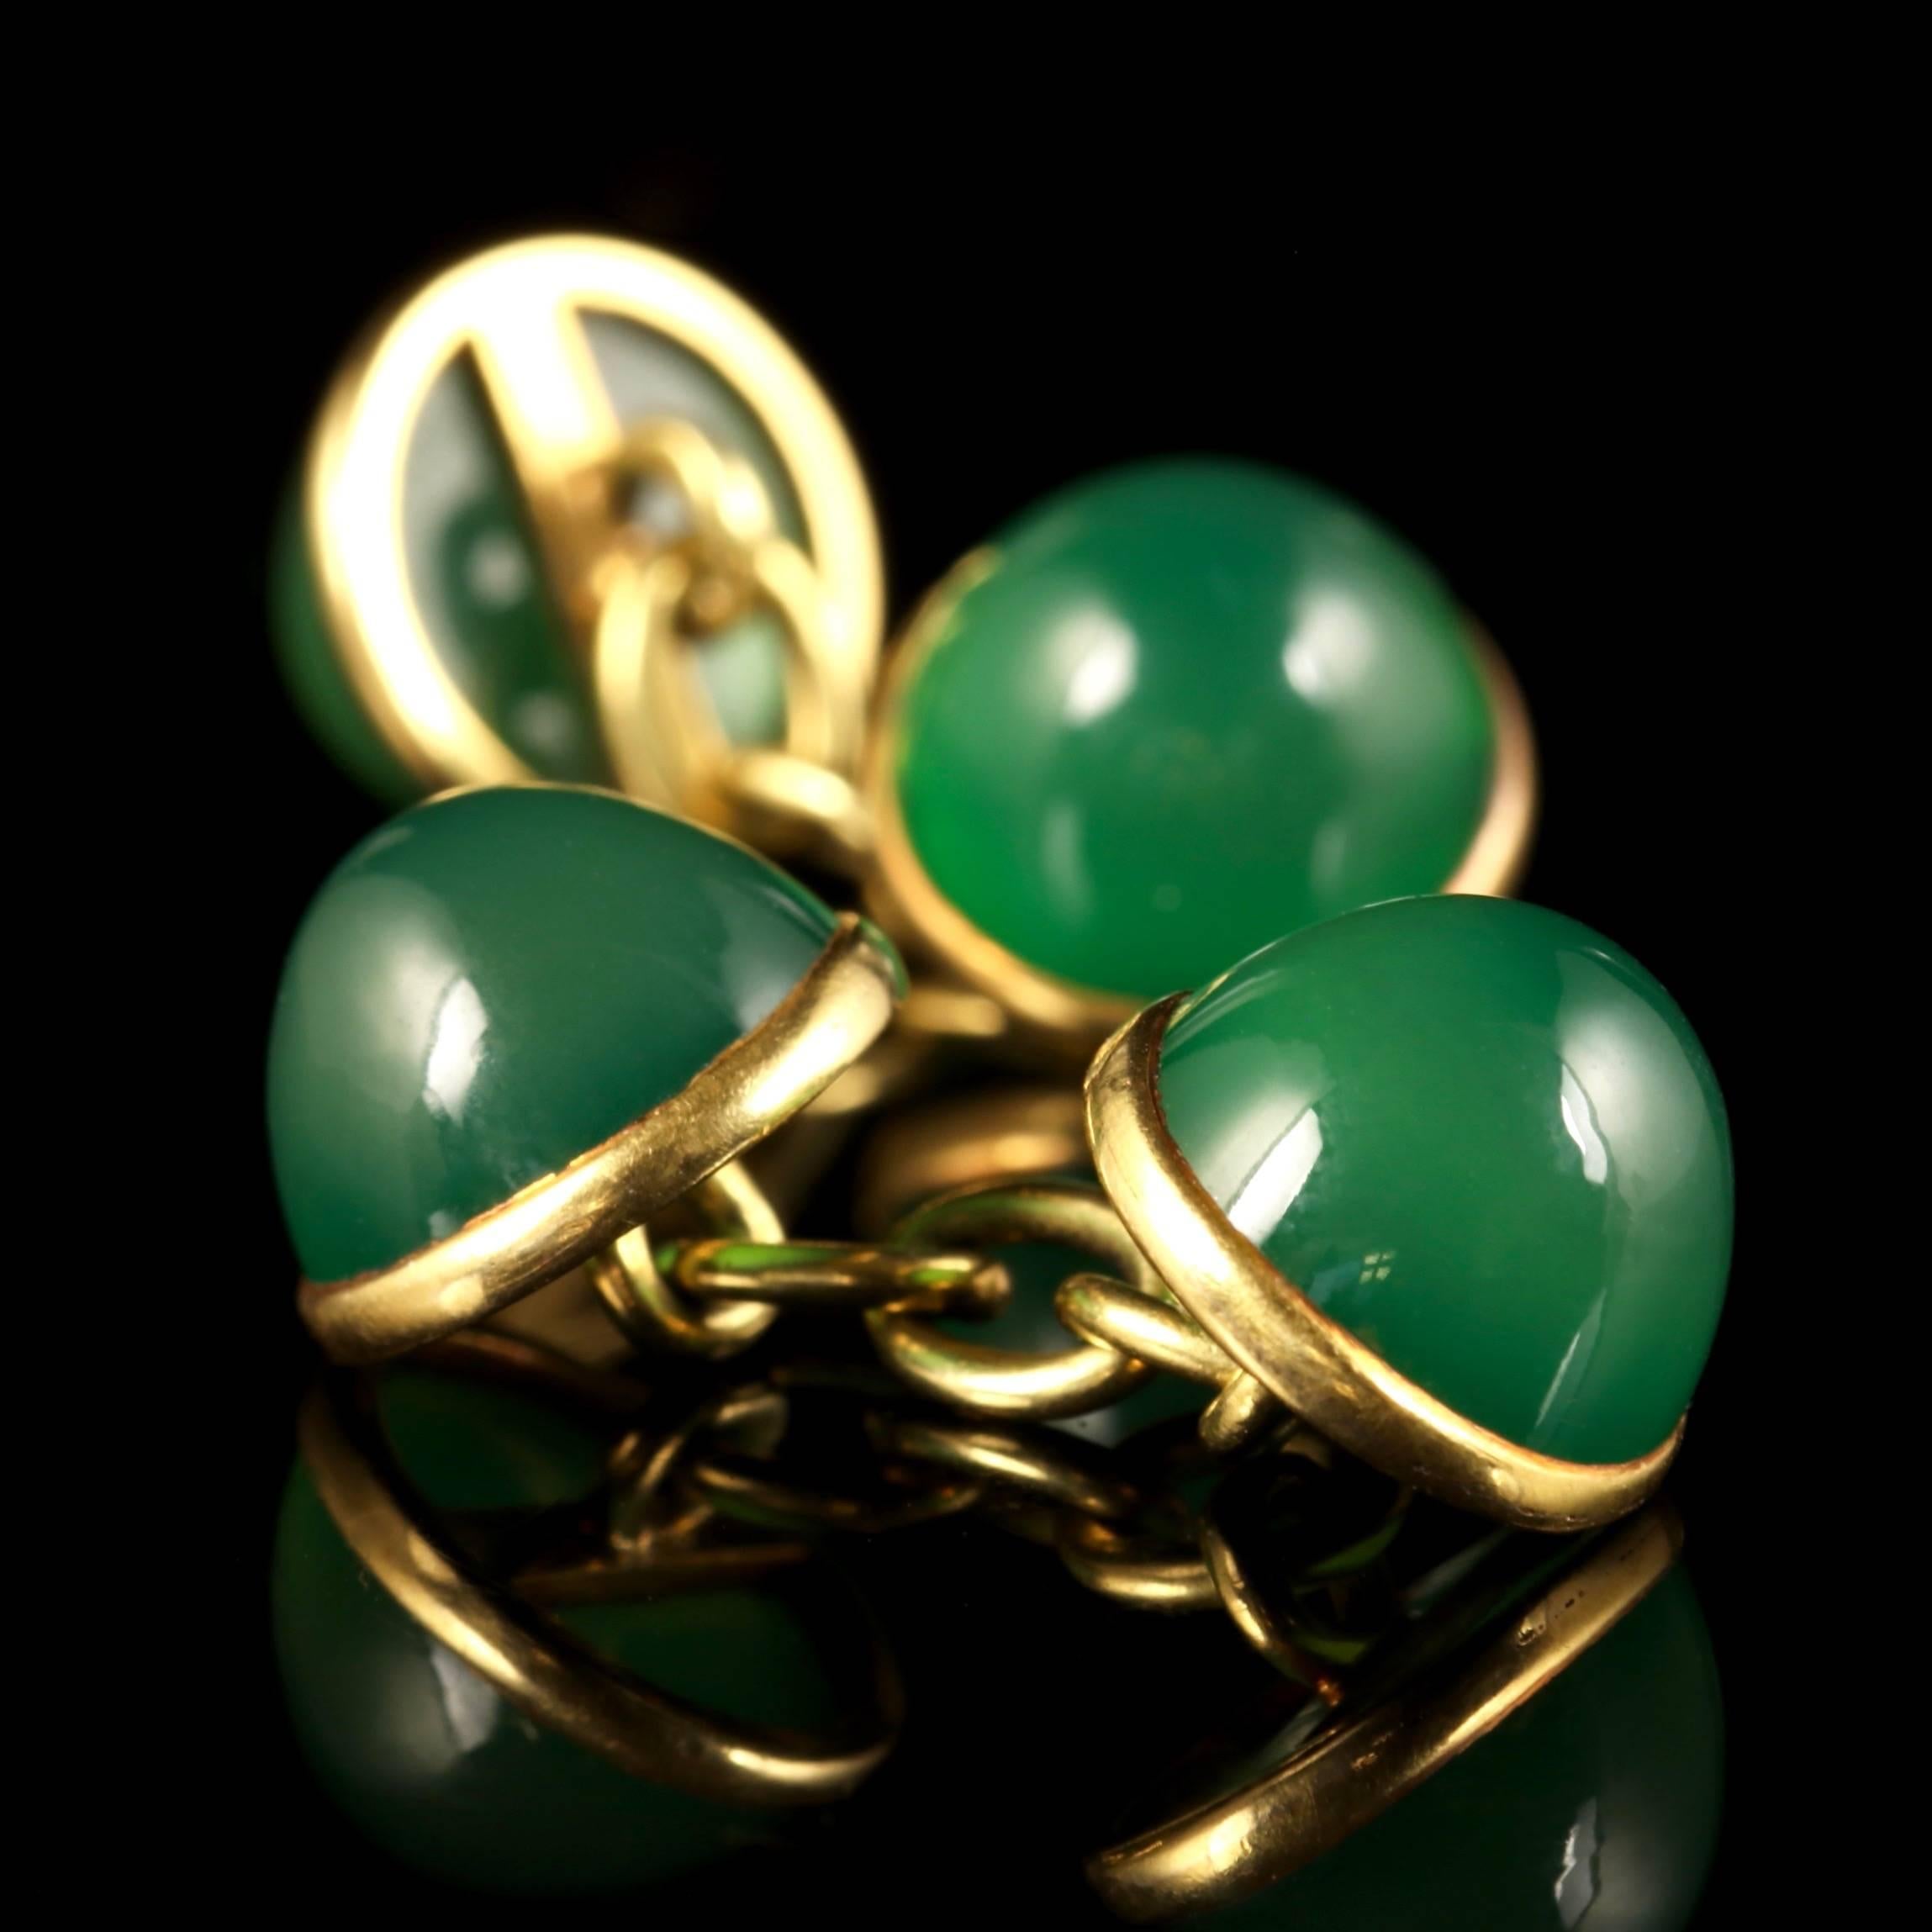 These fabulous 18ct Gold Victorian Chrysoprase double cufflinks are Circa 1900.

Each glowing Chrysoprase gemstone is 3ct.

Chrysoprase crystal properties are an effective prescription for encouraging a more positive outlook on life. Keep this